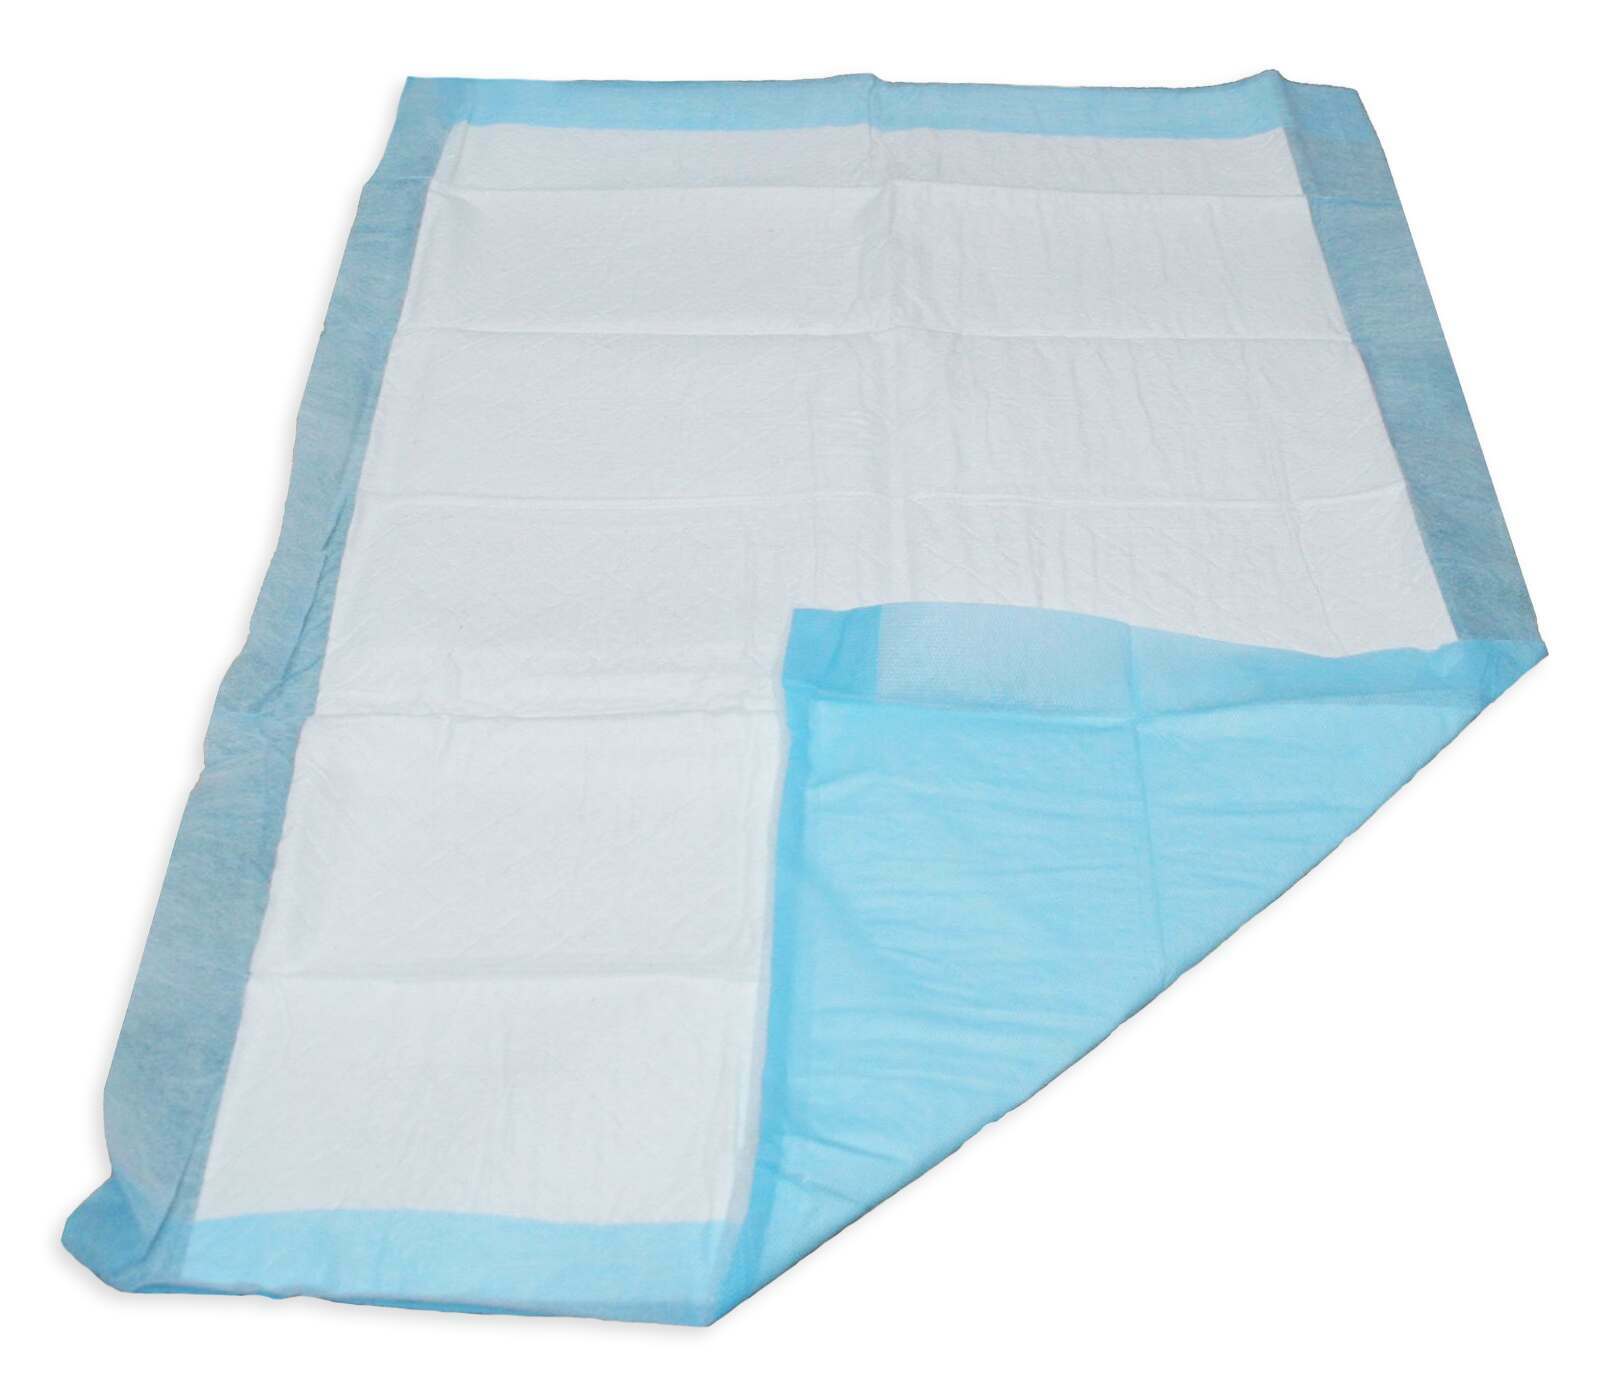 Drylife Basic Disposable Bed Pads - 40cm x 60cm - Pack of 25 | eBay